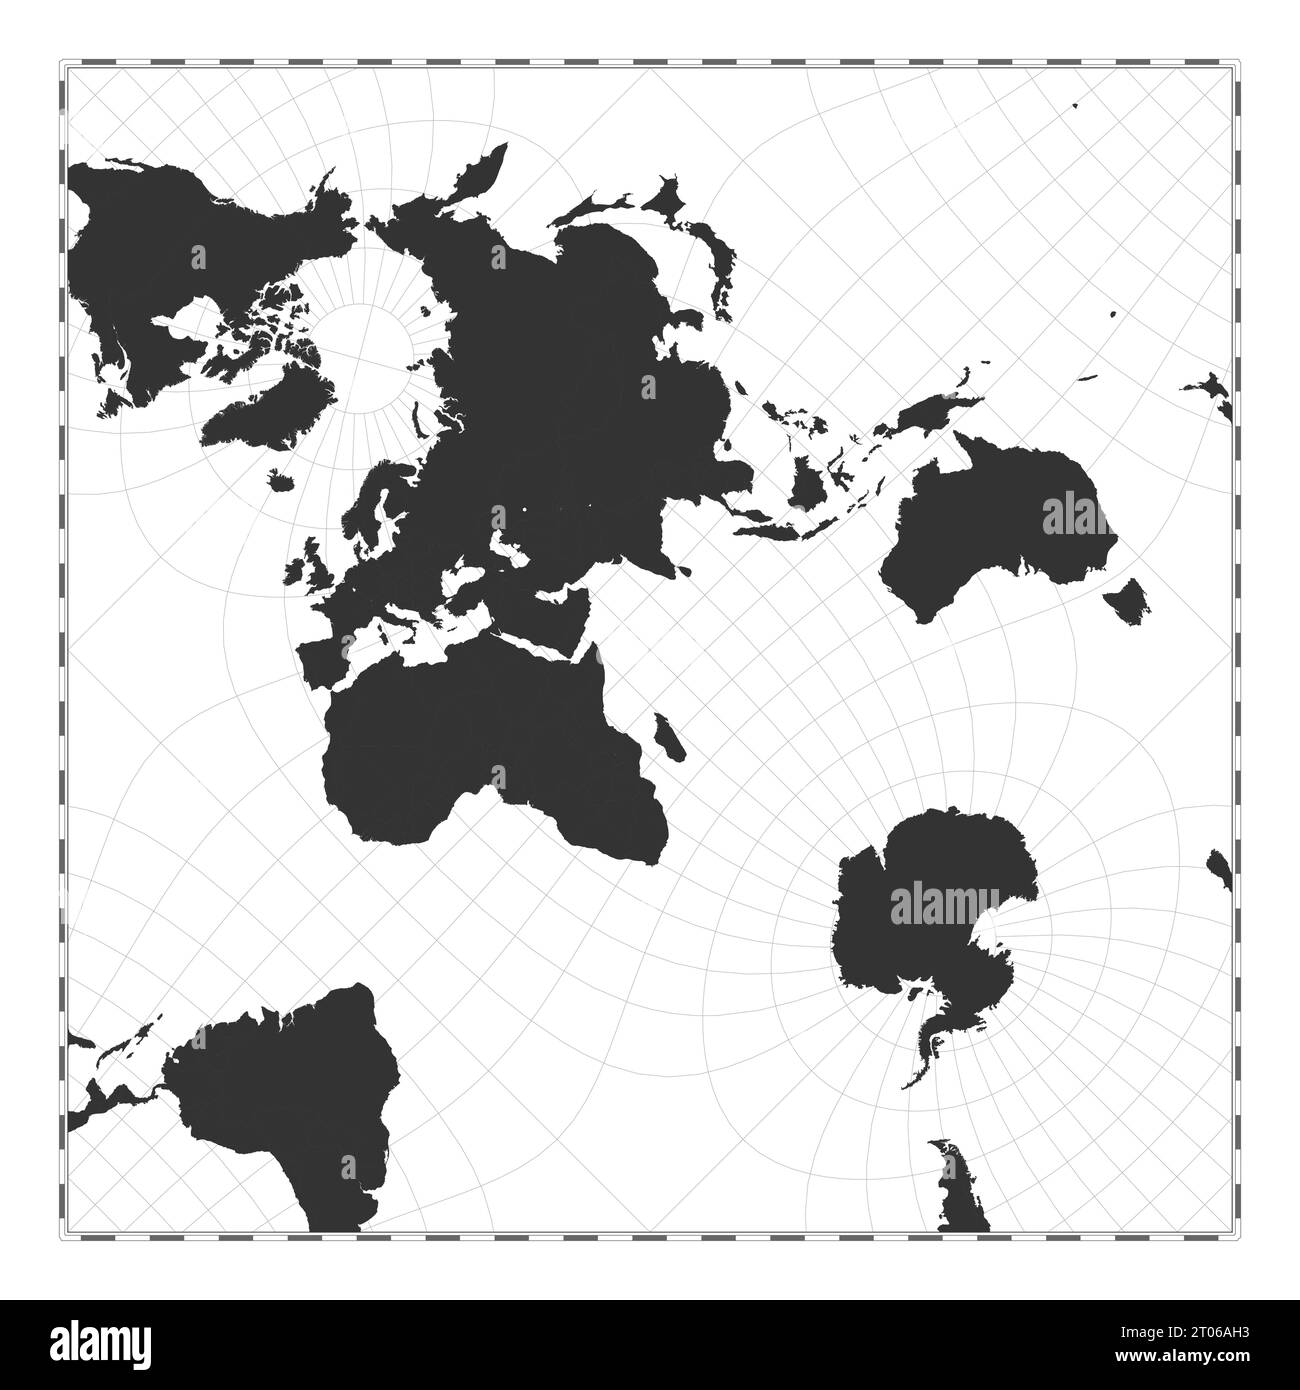 Vector world map. Peirce quincuncial projection. Plain world geographical map with latitude and longitude lines. Centered to 60deg W longitude. Vector Stock Vector